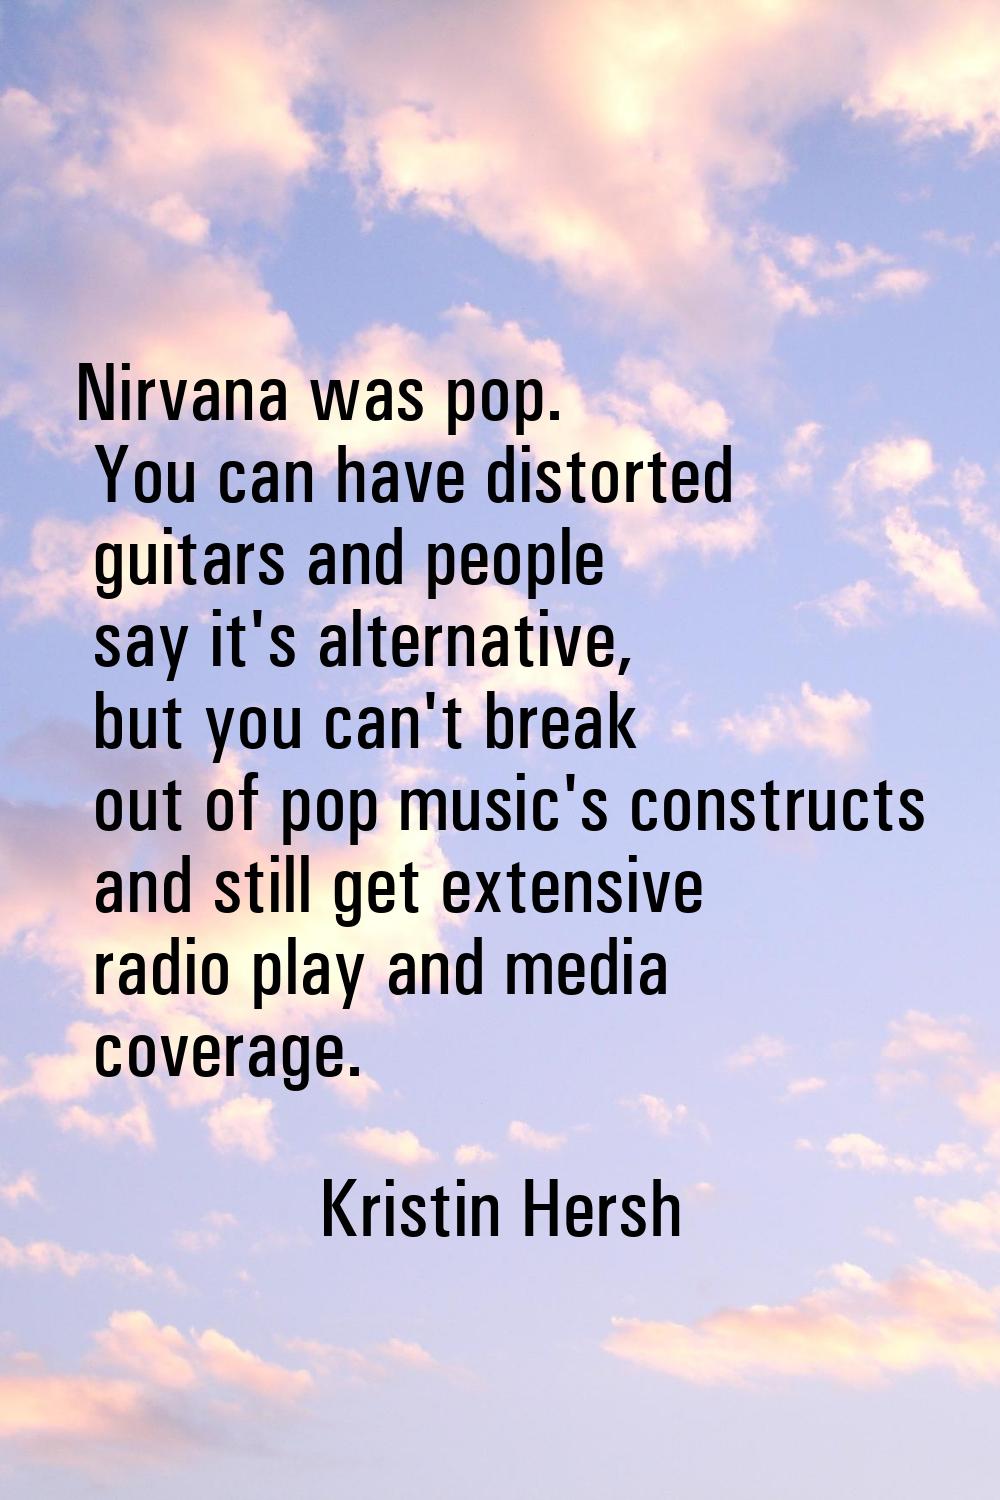 Nirvana was pop. You can have distorted guitars and people say it's alternative, but you can't brea